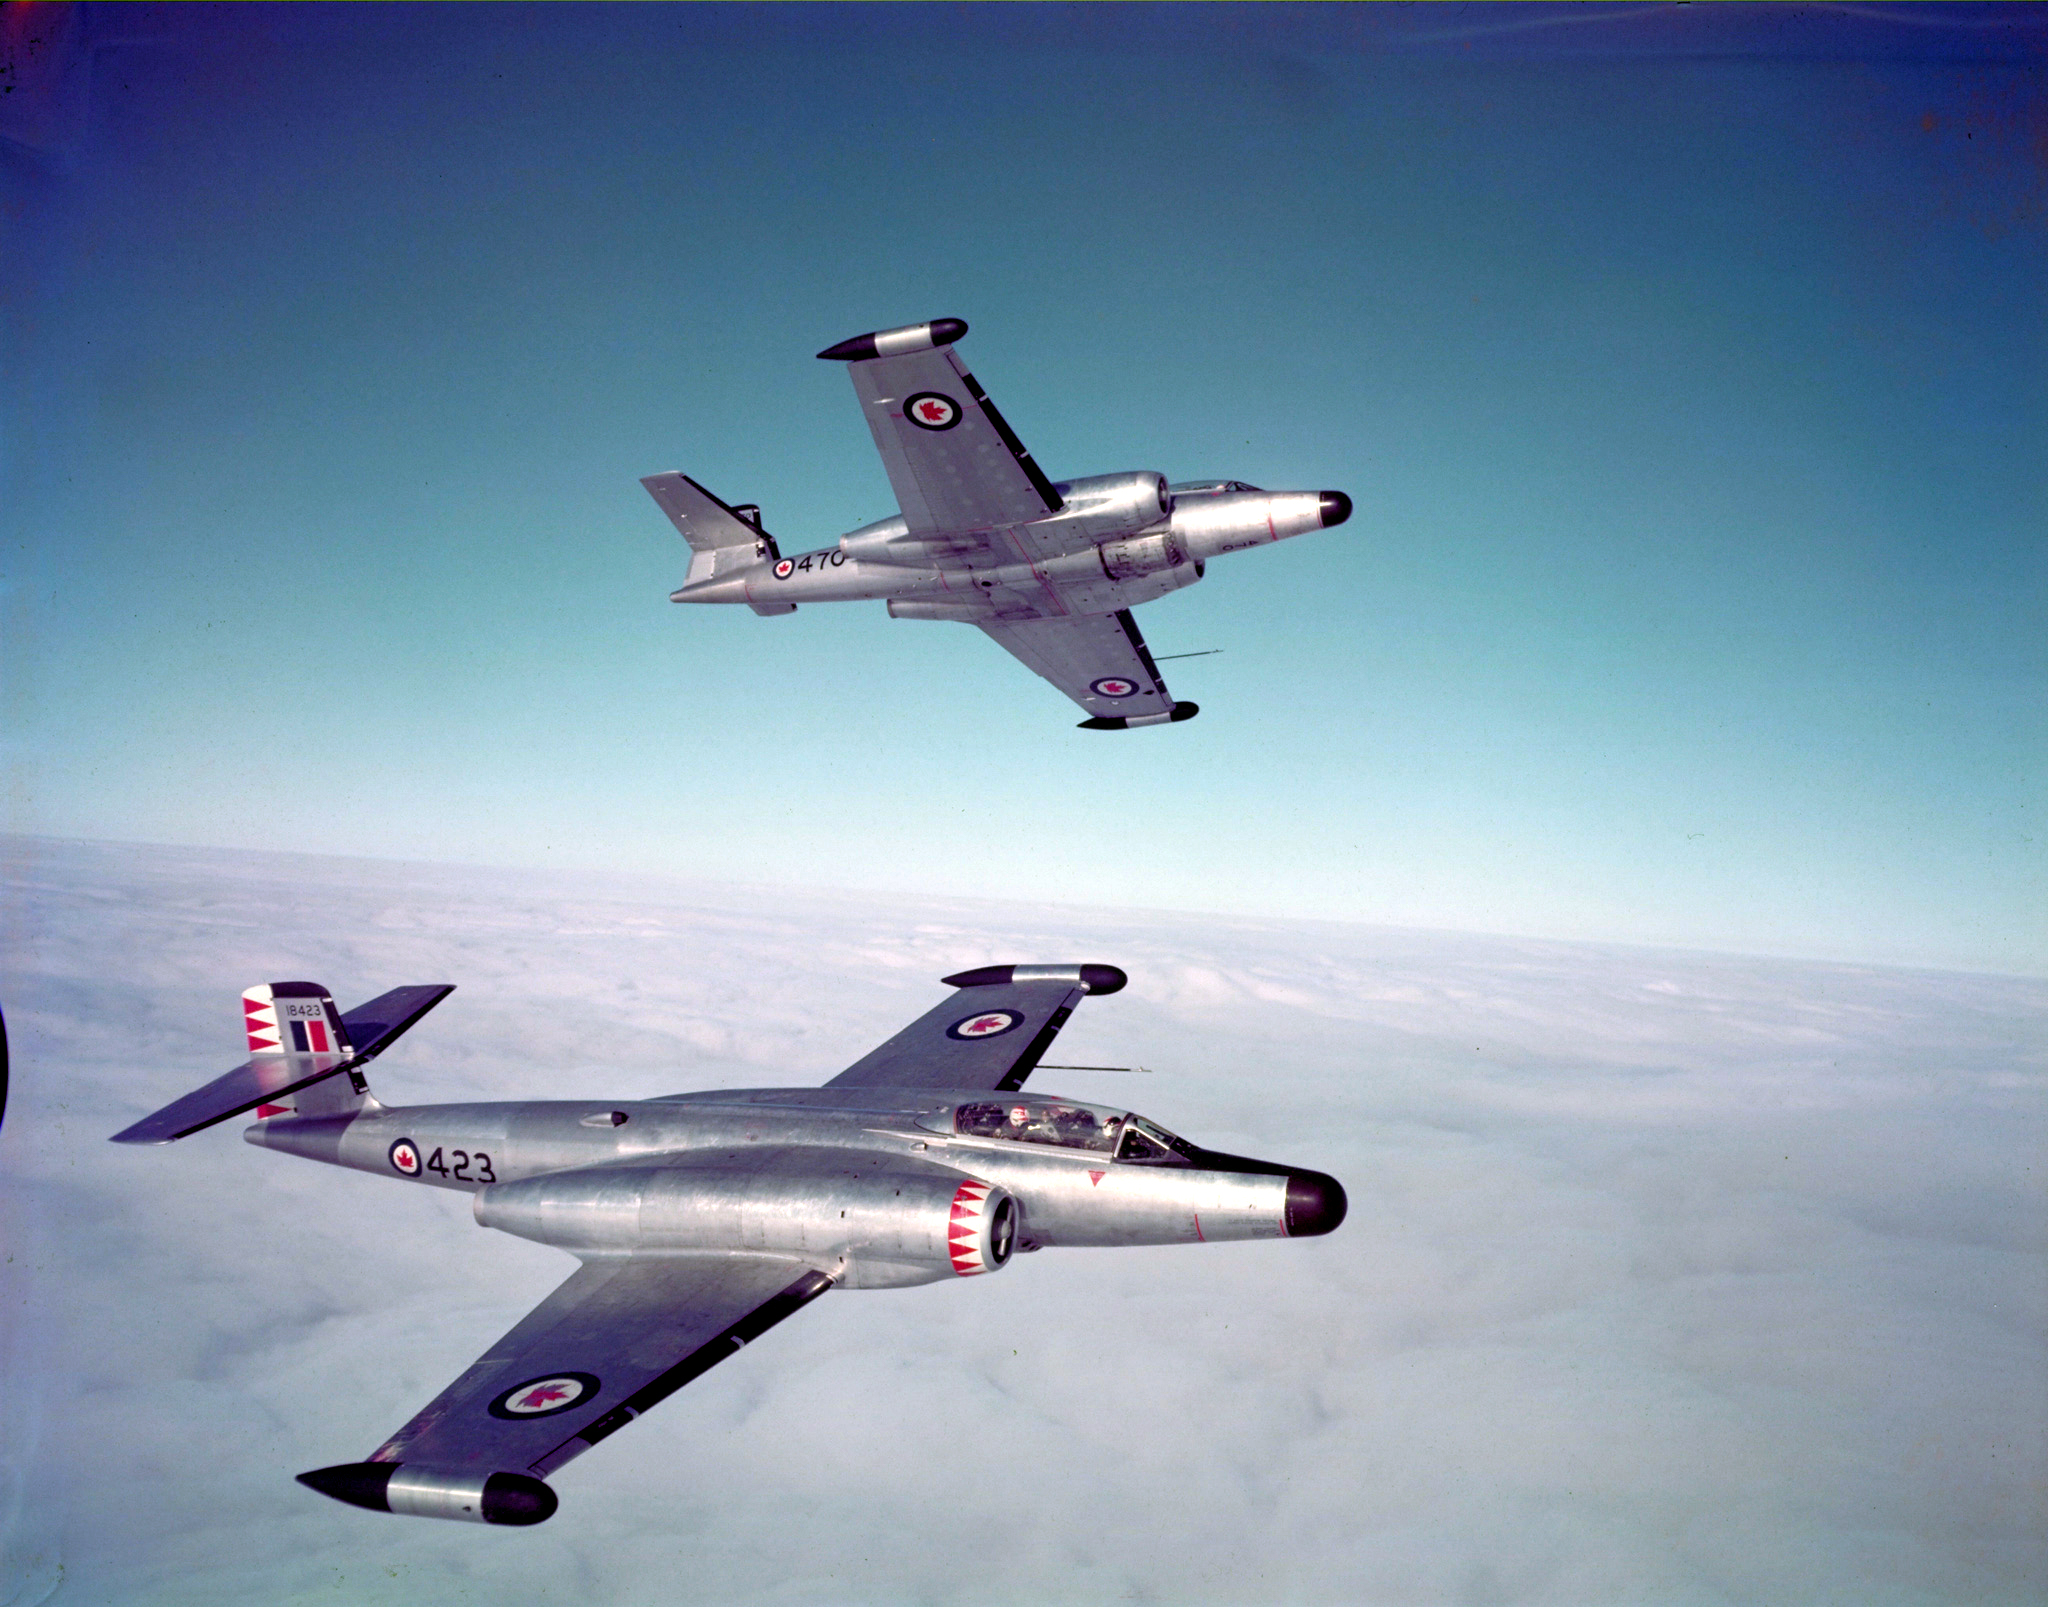 Two CF-100 Mk IV Canucks in flight. PHOTO: DND Archives, PC-1089